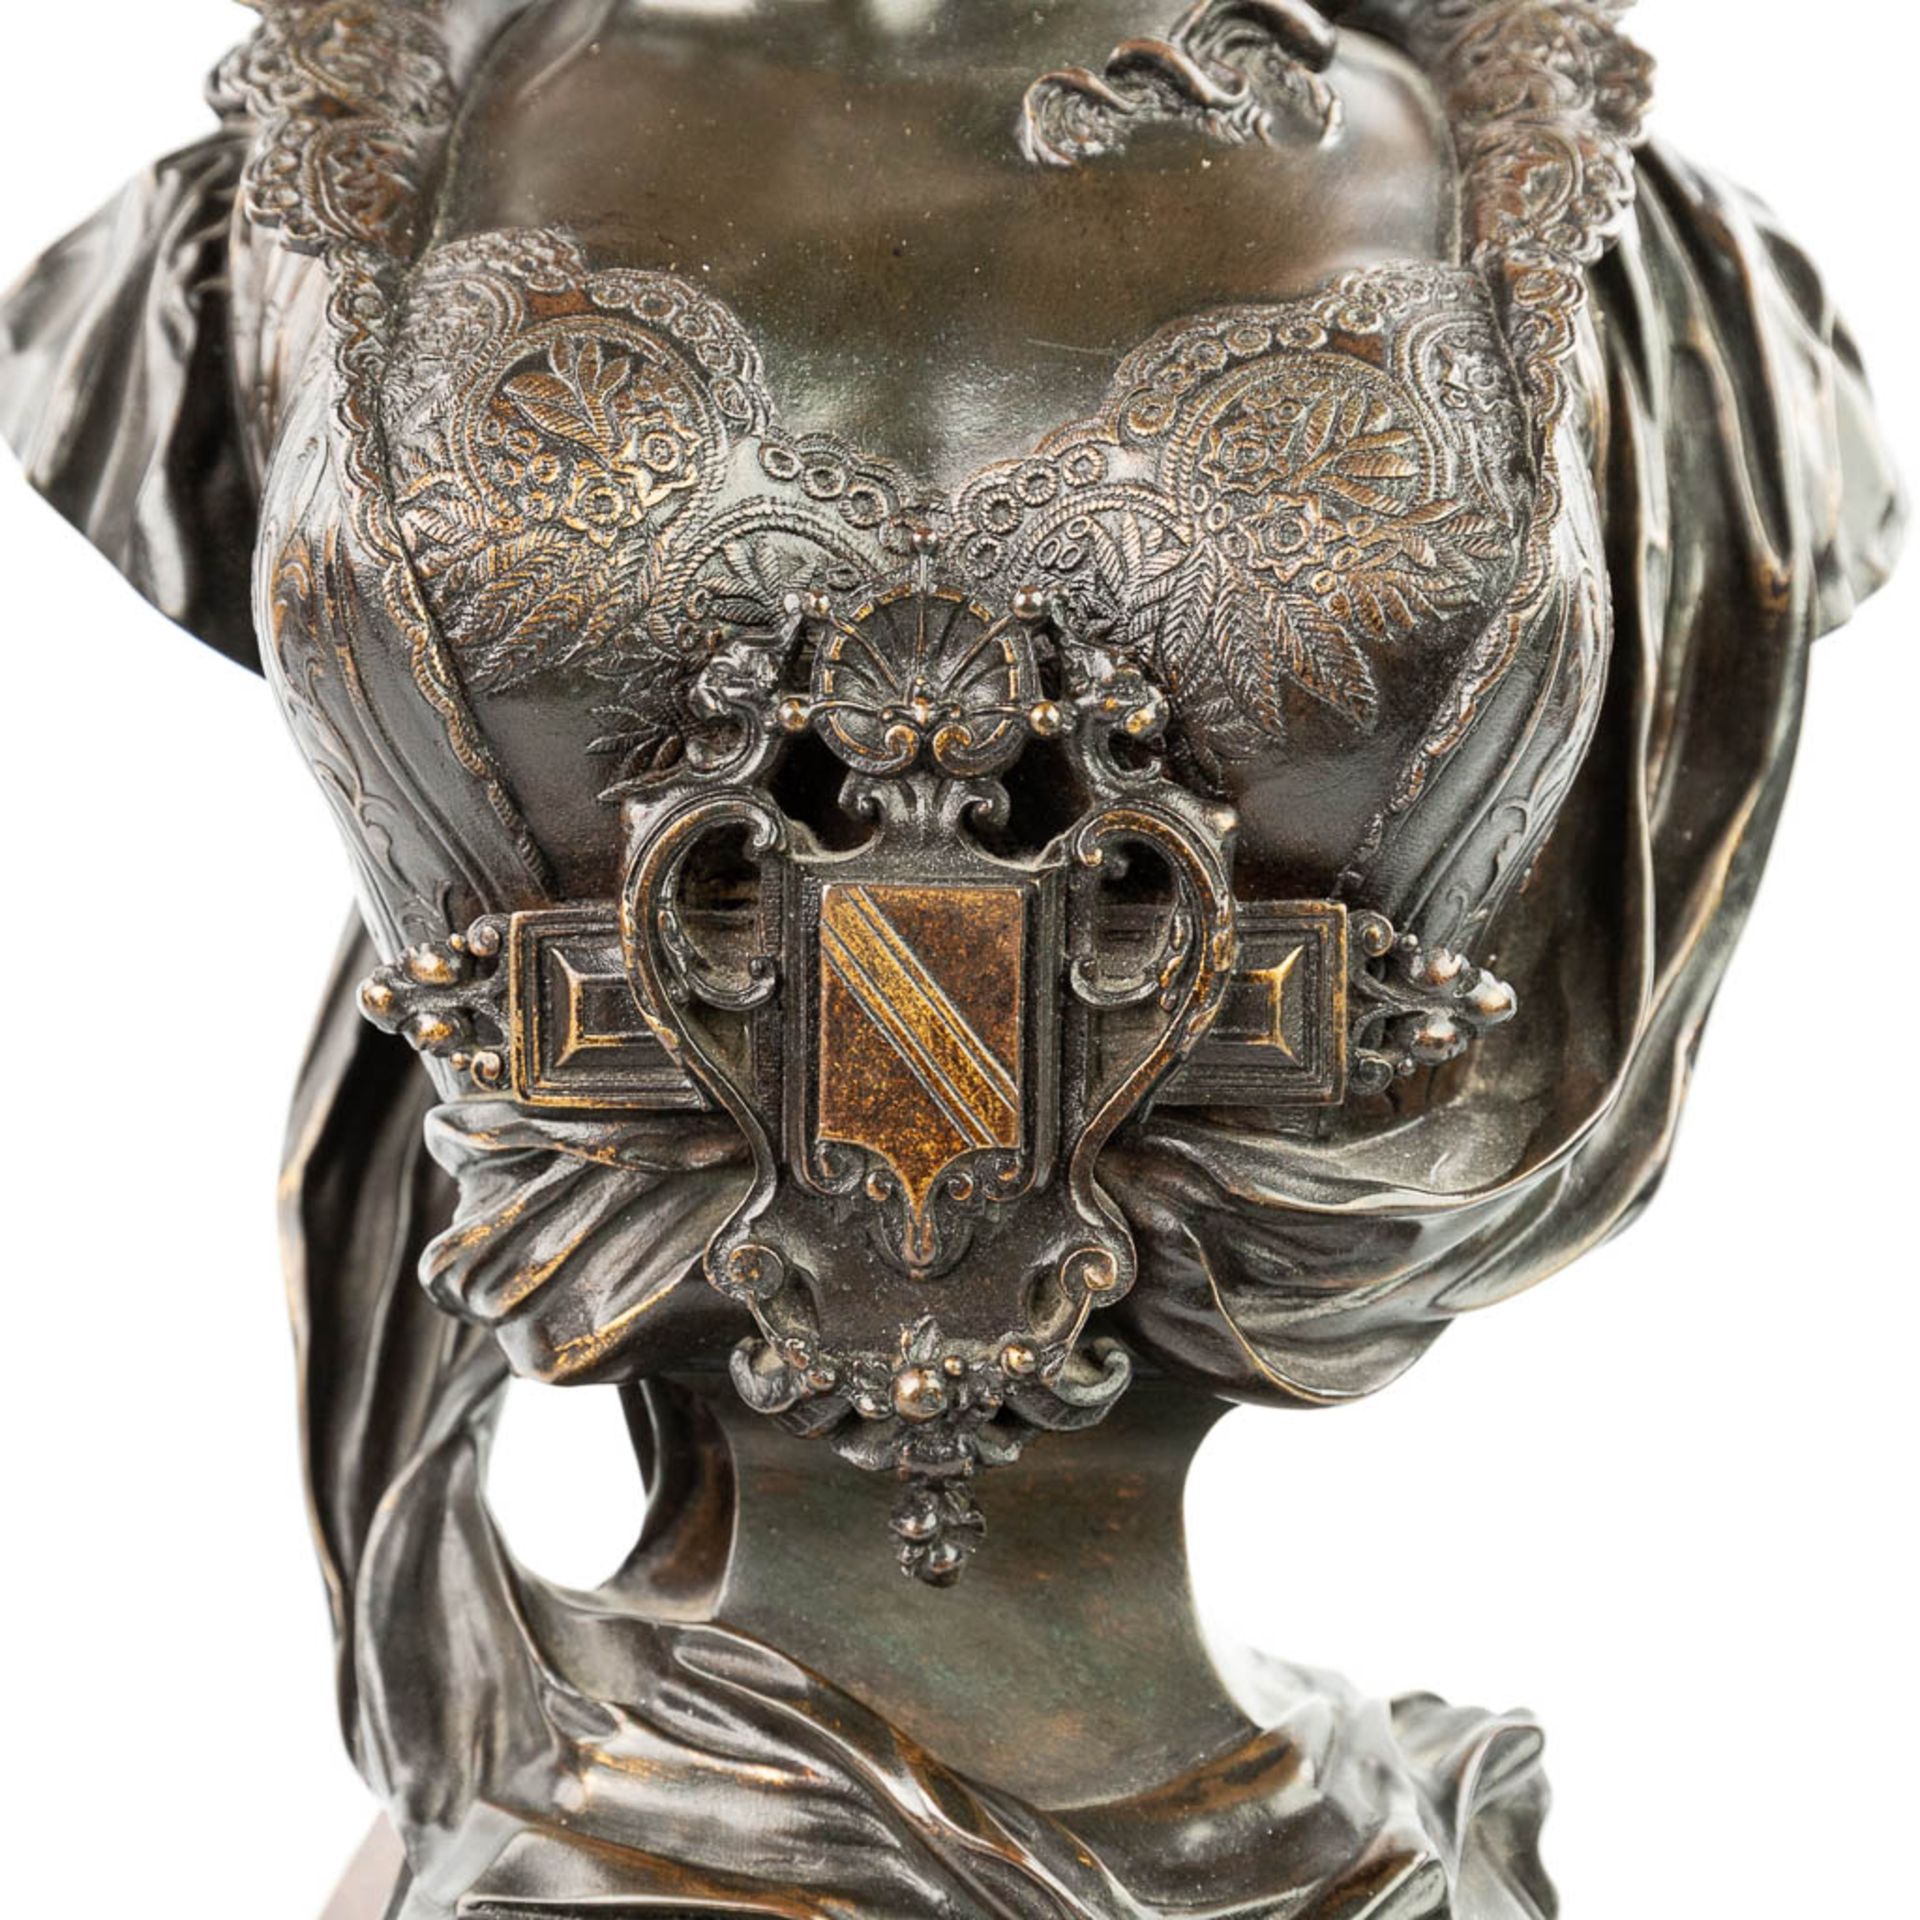 Paul DUBOIS (1829-1905) 'Beatrix' a bronze bust, mounted on a red marble base. (H:59cm) - Image 10 of 11